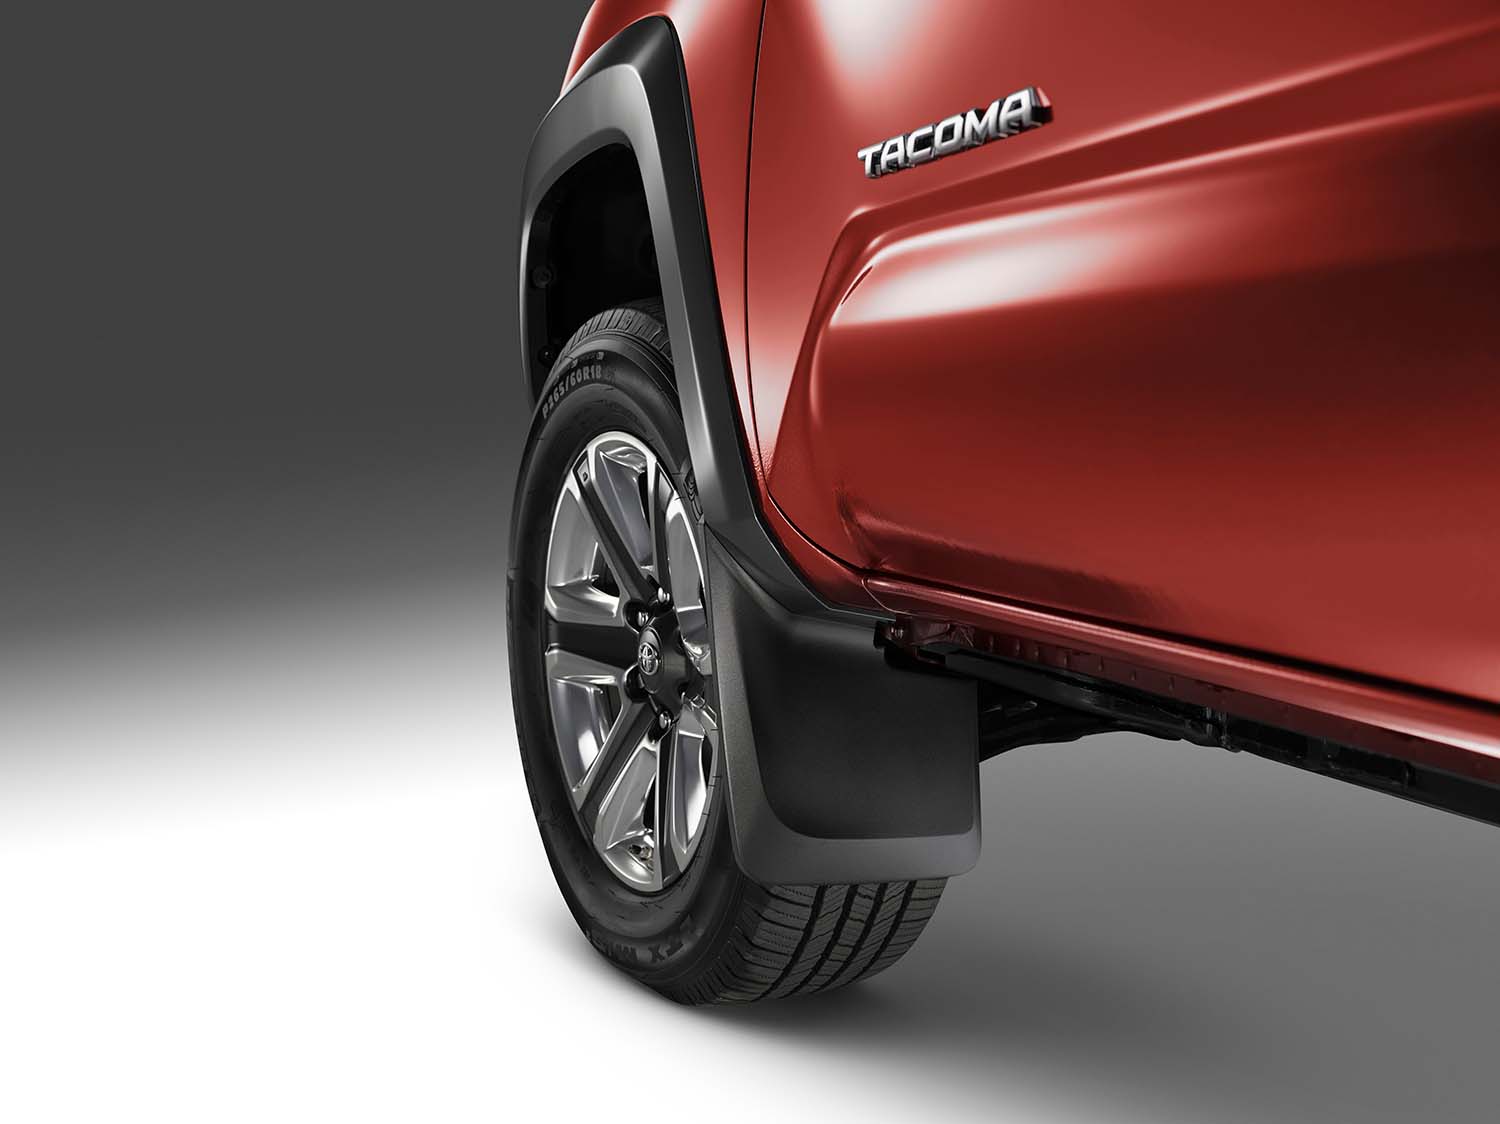 Accessories that help keep your Toyota protected at Bennett Toyota in Allentown, PA | Toyota Tacoma mudguards